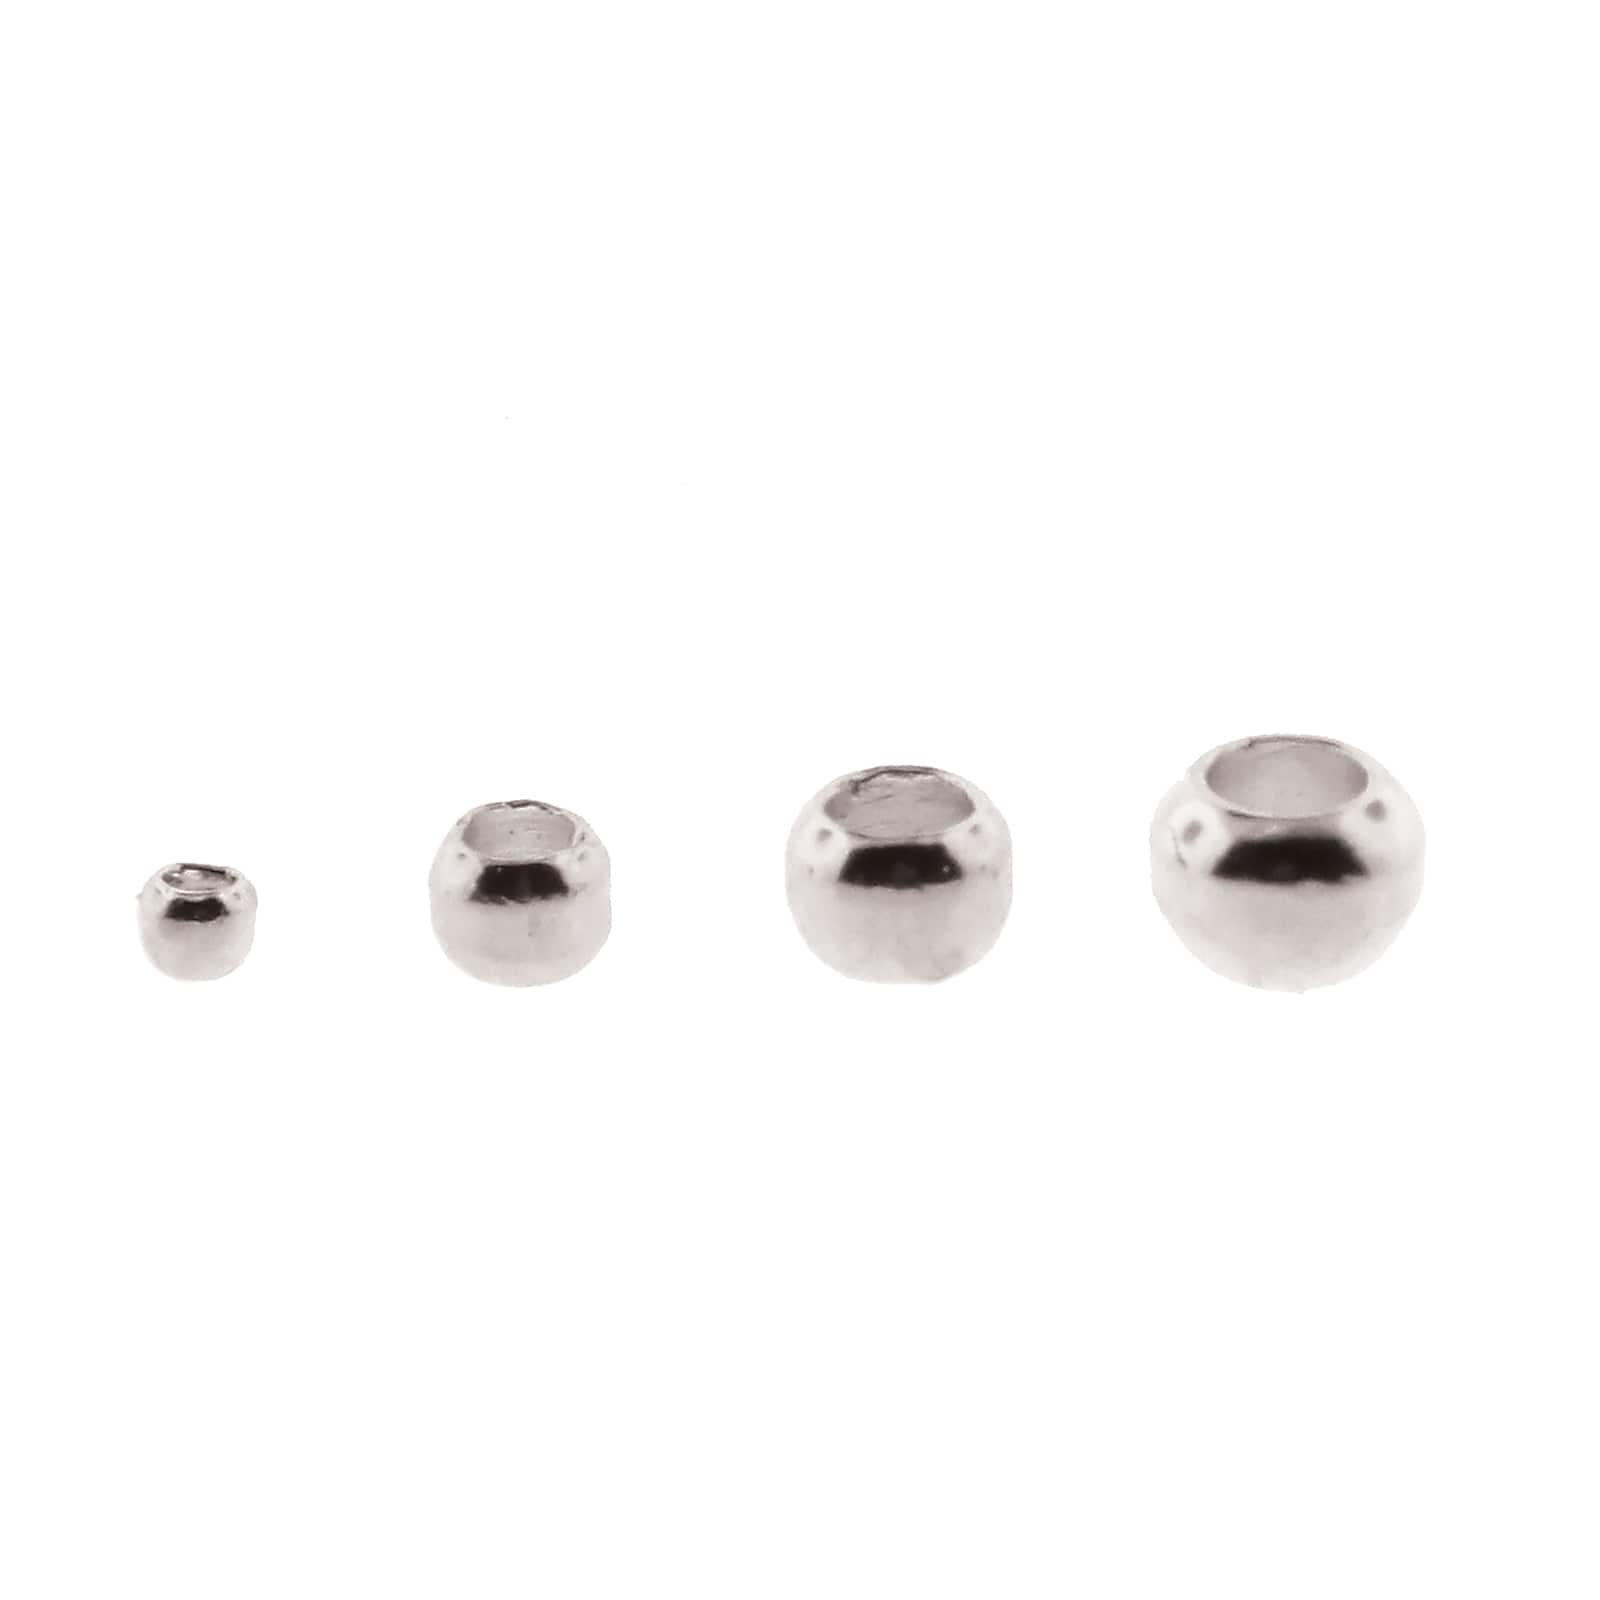 20pc 4x3.5mm Brass Crimp Bead Covers, Silver - Bead Box Bargains